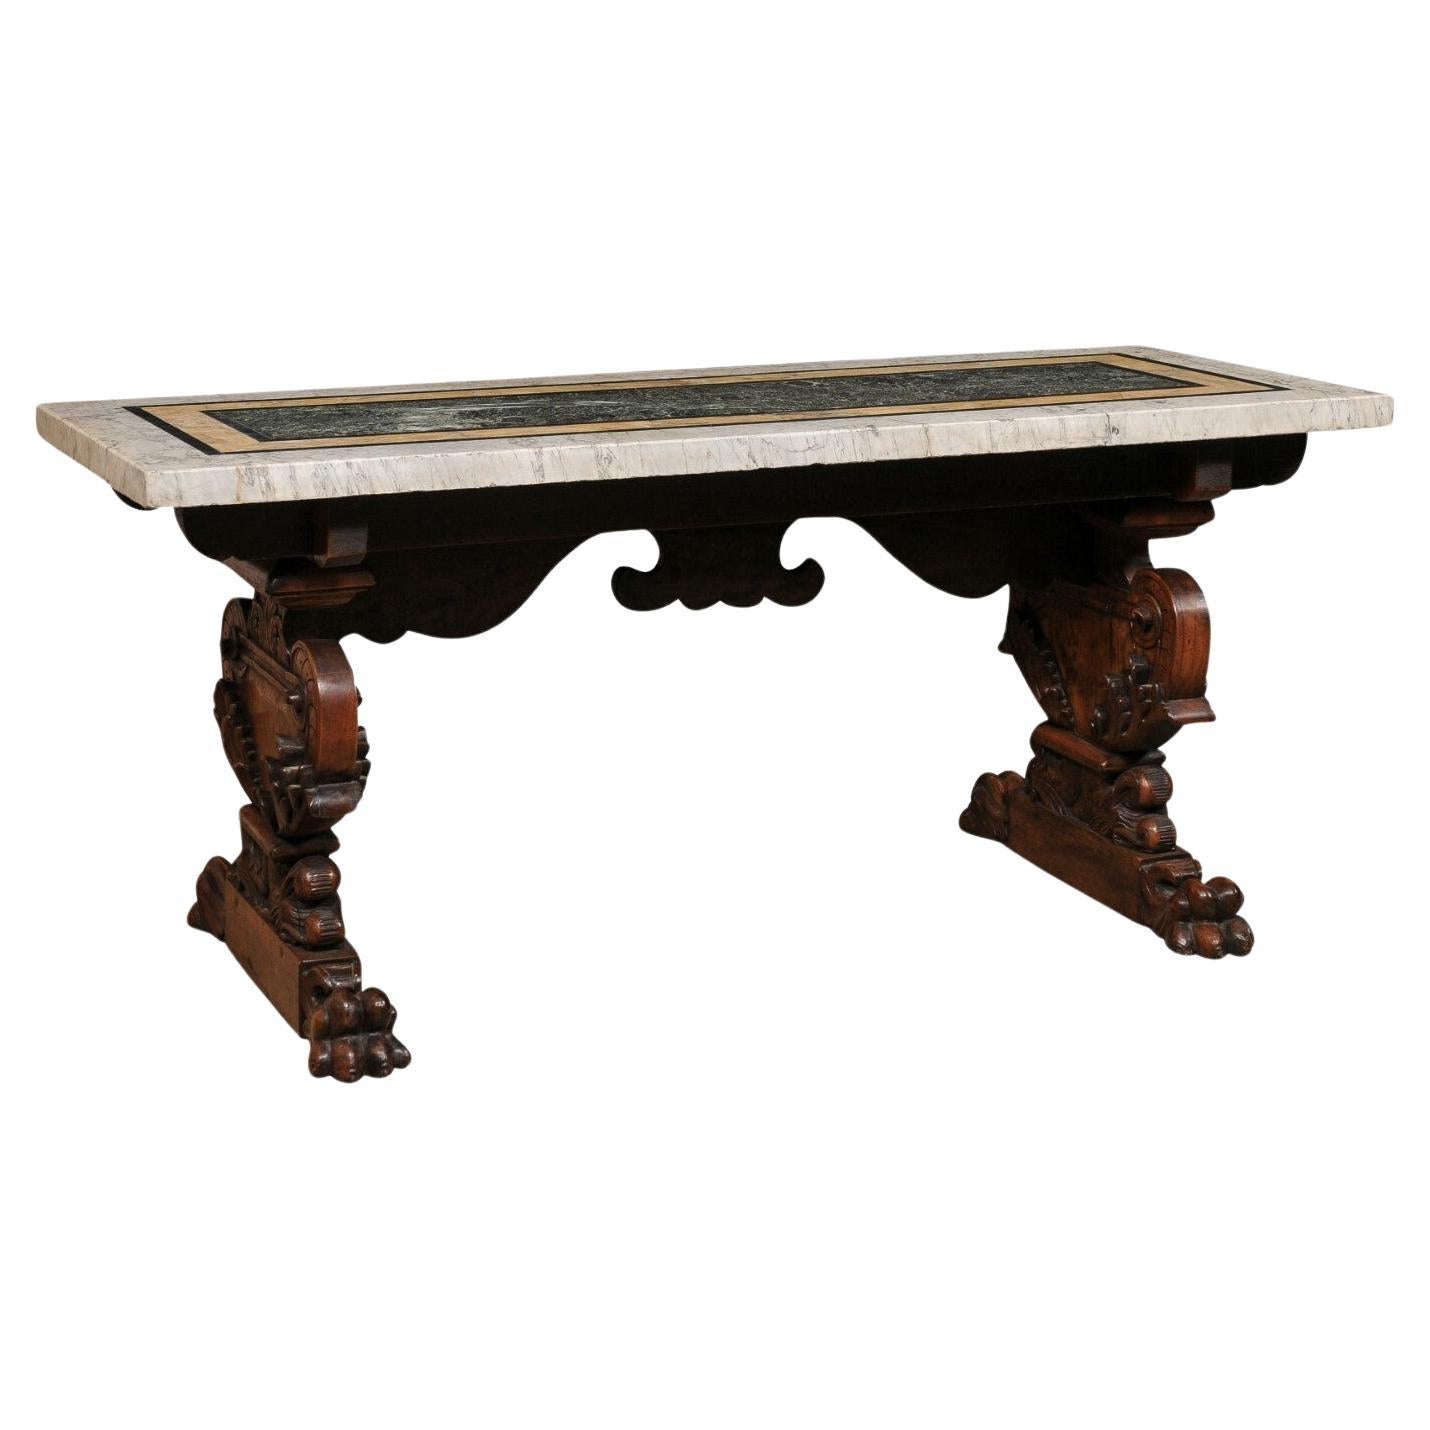 A Gorgeous 18th C Italian Inlaid Marble Top Table w/Robustly Carved Trestle Legs